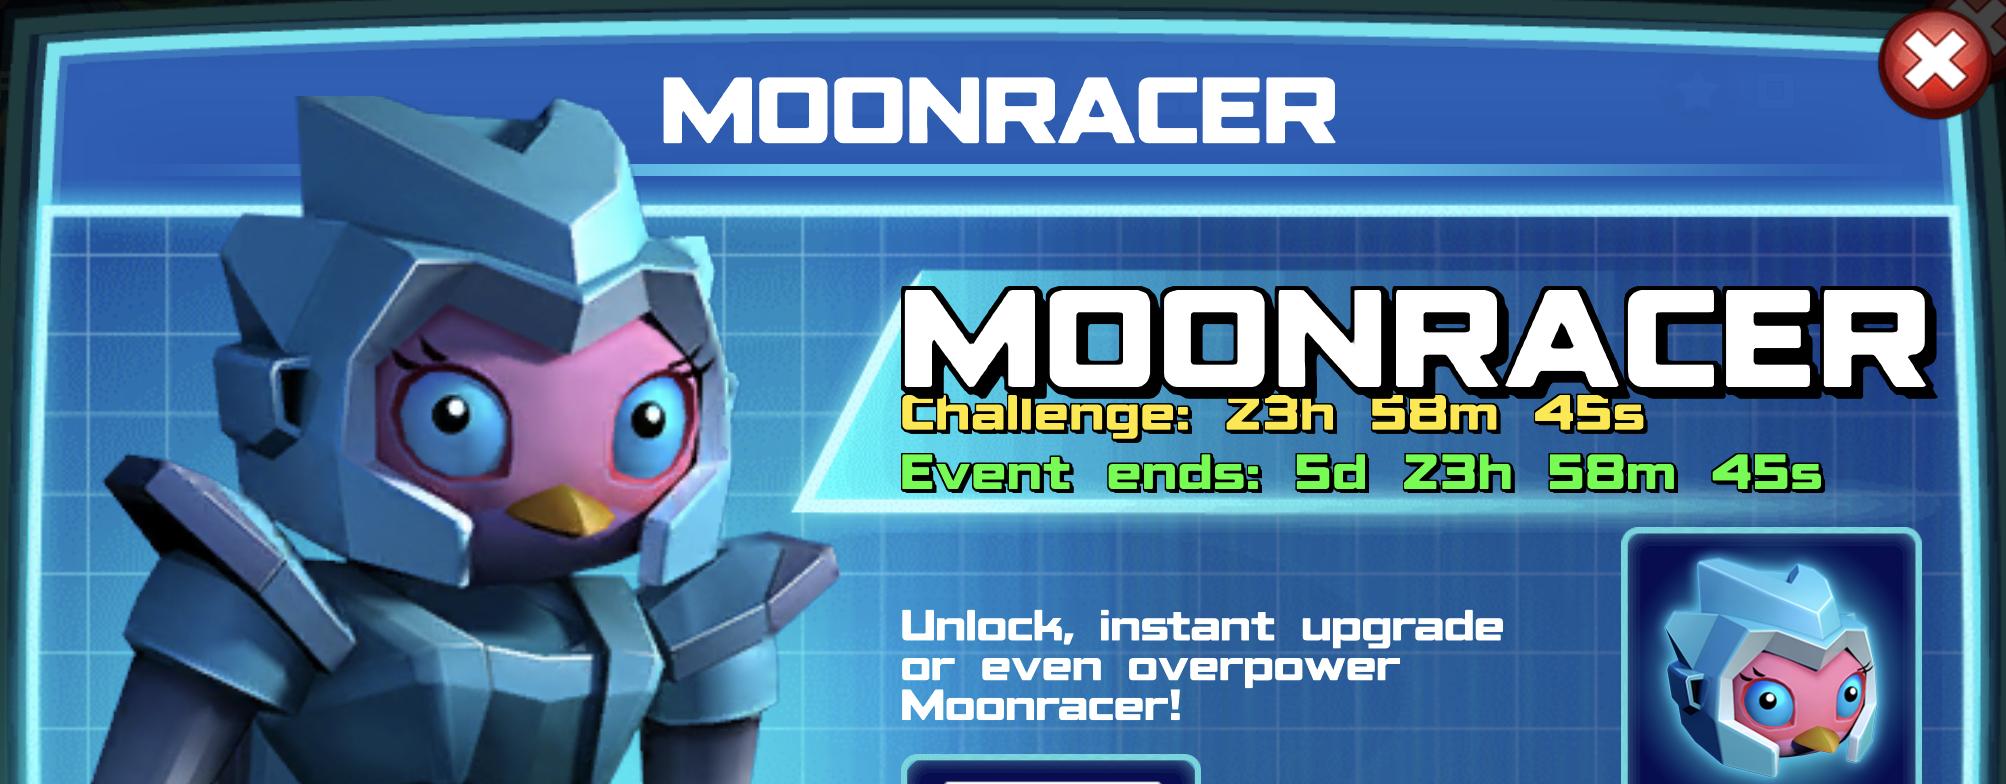 The event banner for Moonracer